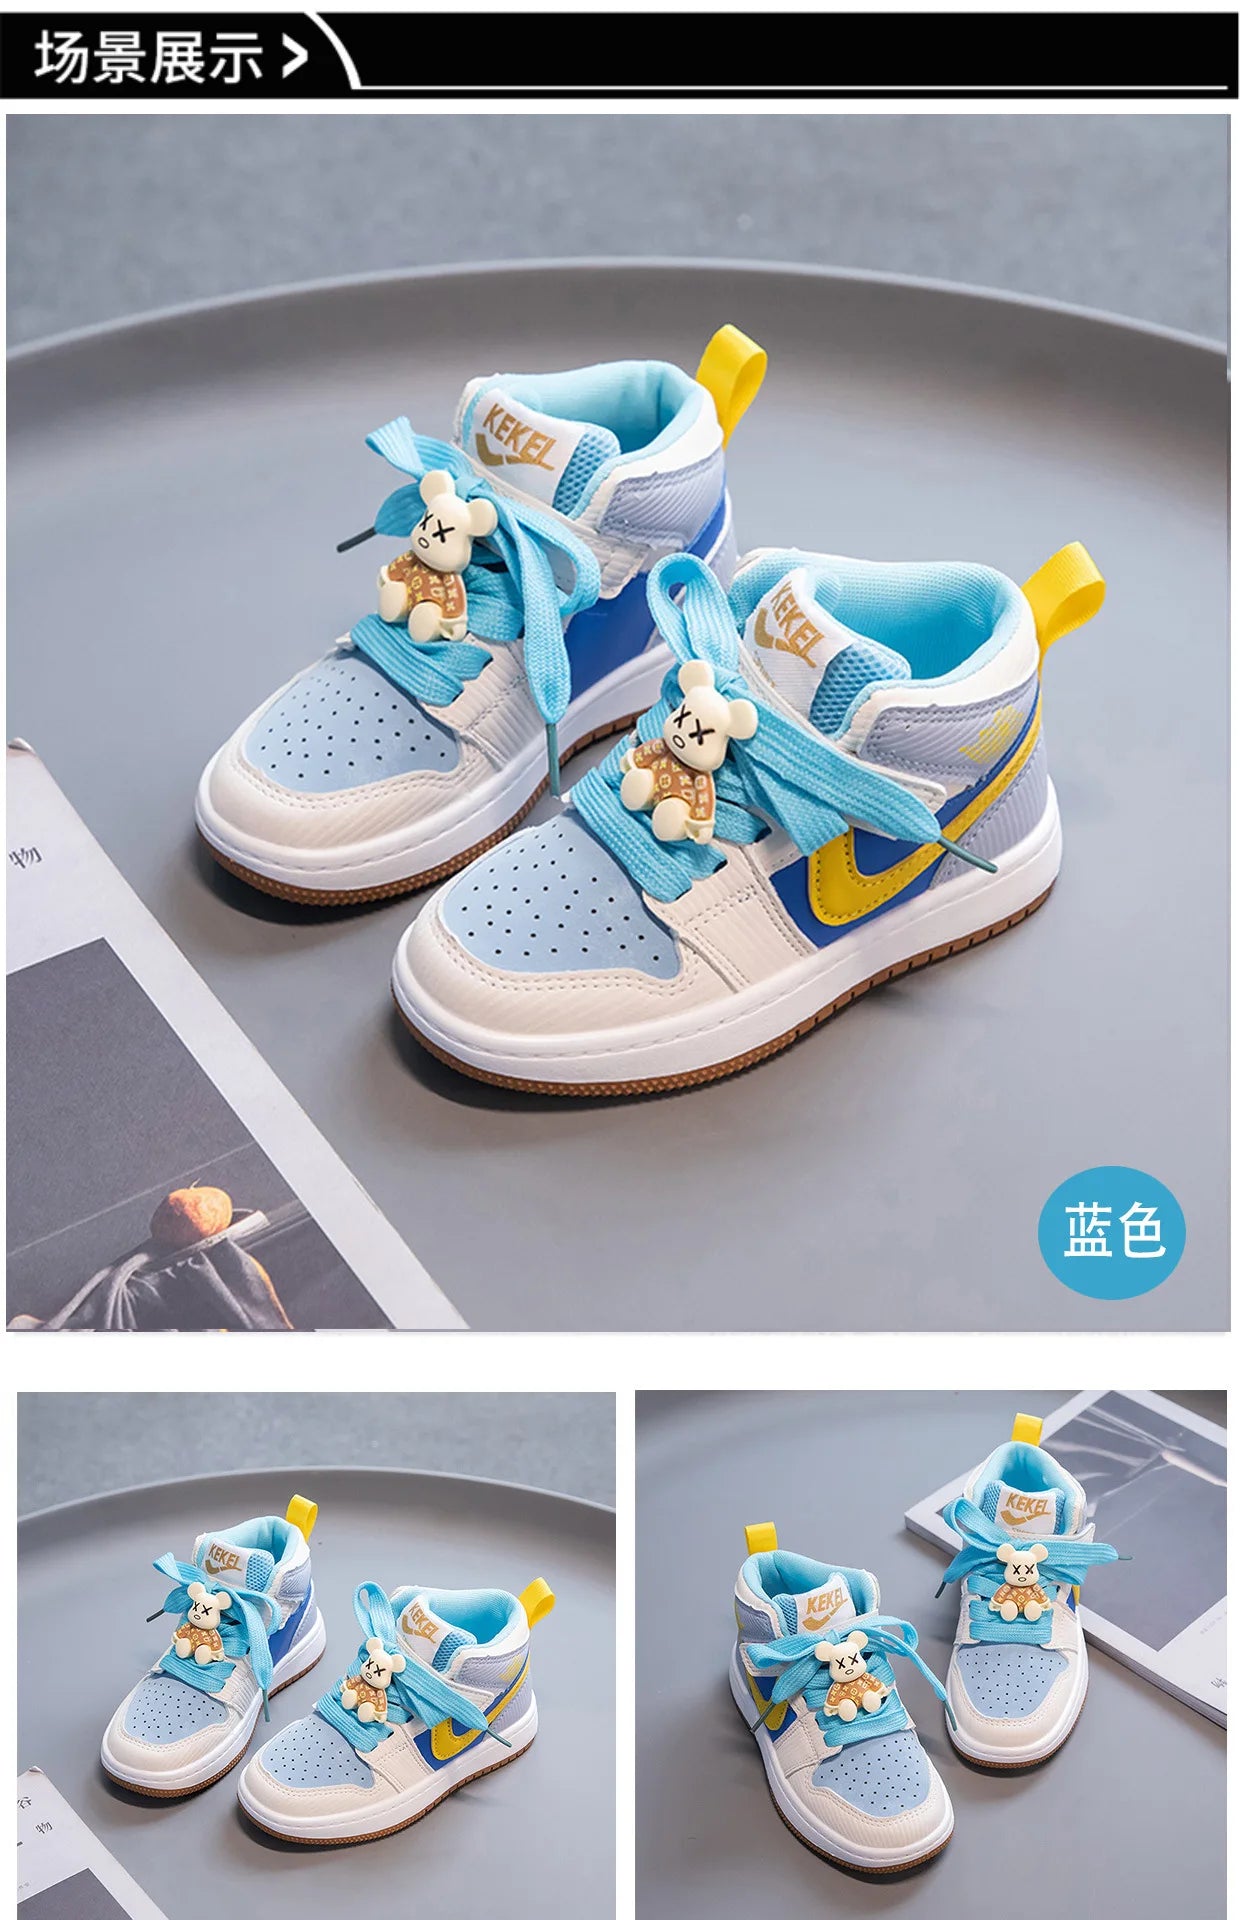 Girls' Sneakers New Boys' Non-Slip Sneakers Middle and Big Children's High-Top Running Shoes